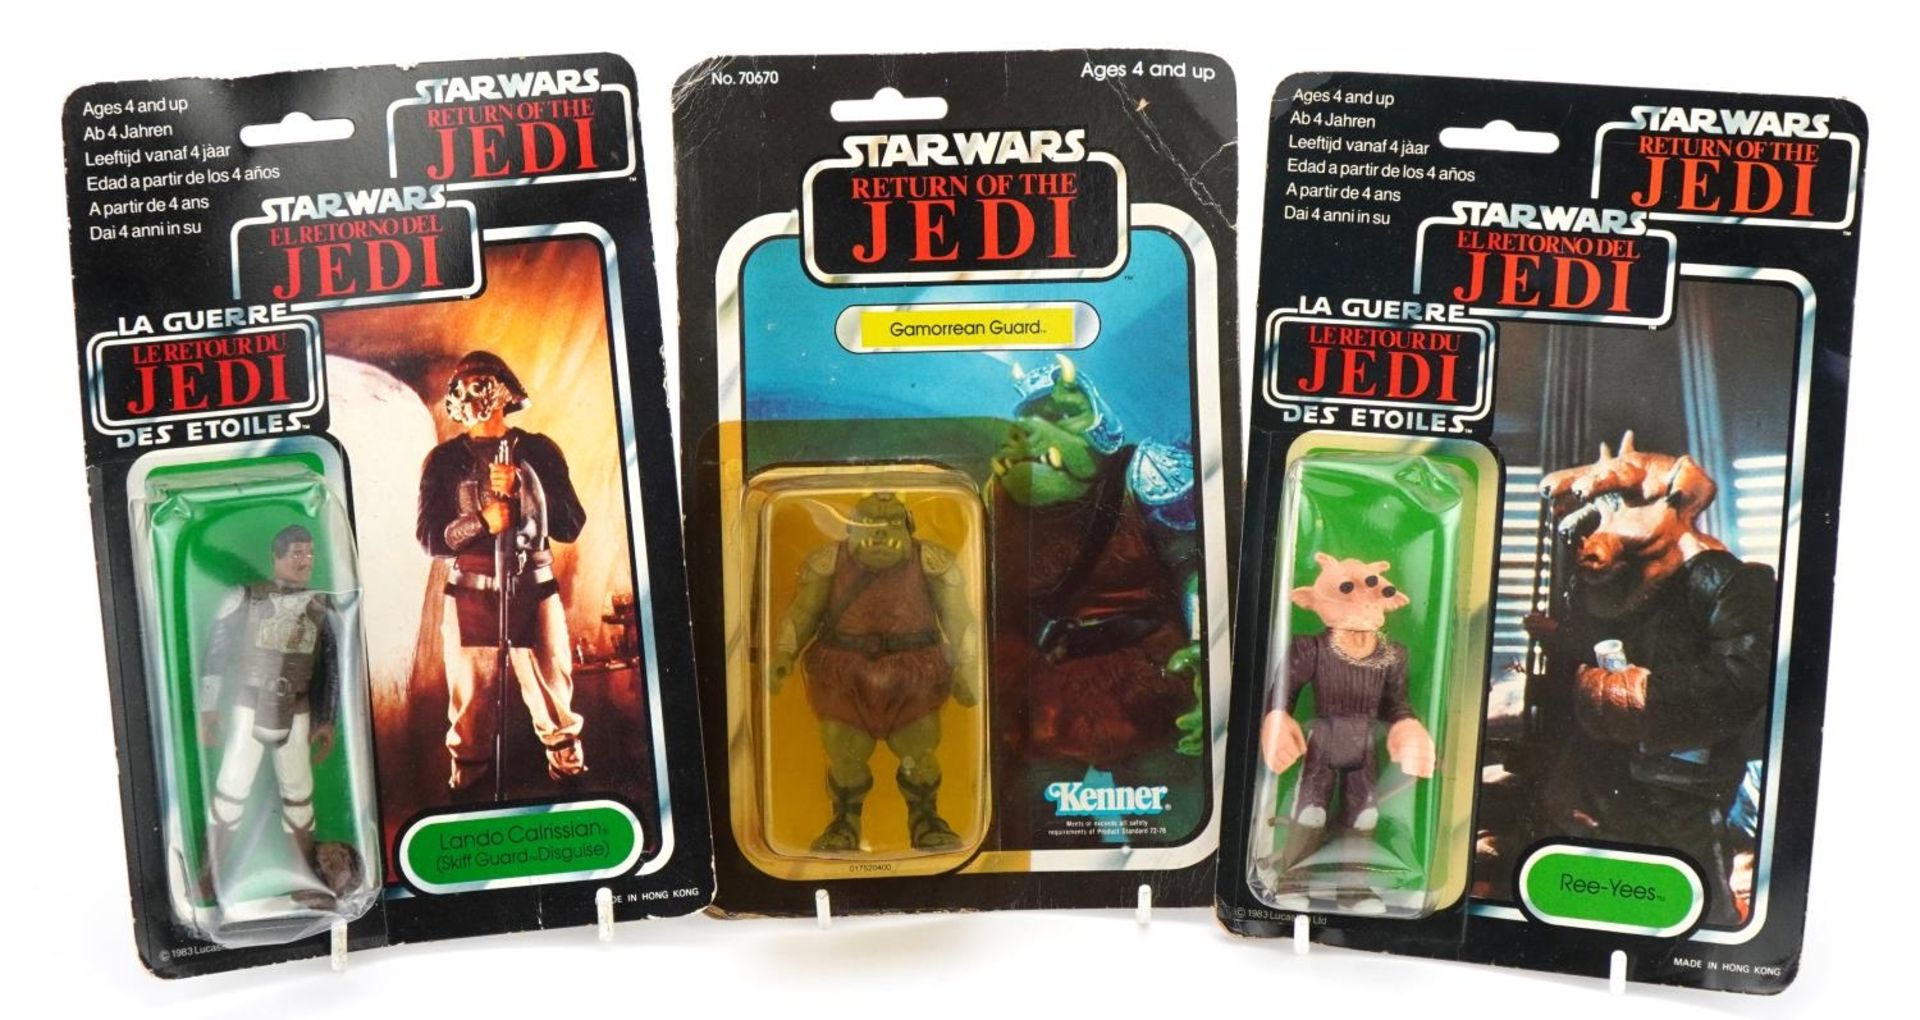 Three Star Wars Return of the Jedi action figures housed in sealed blister packs comprising Ree-